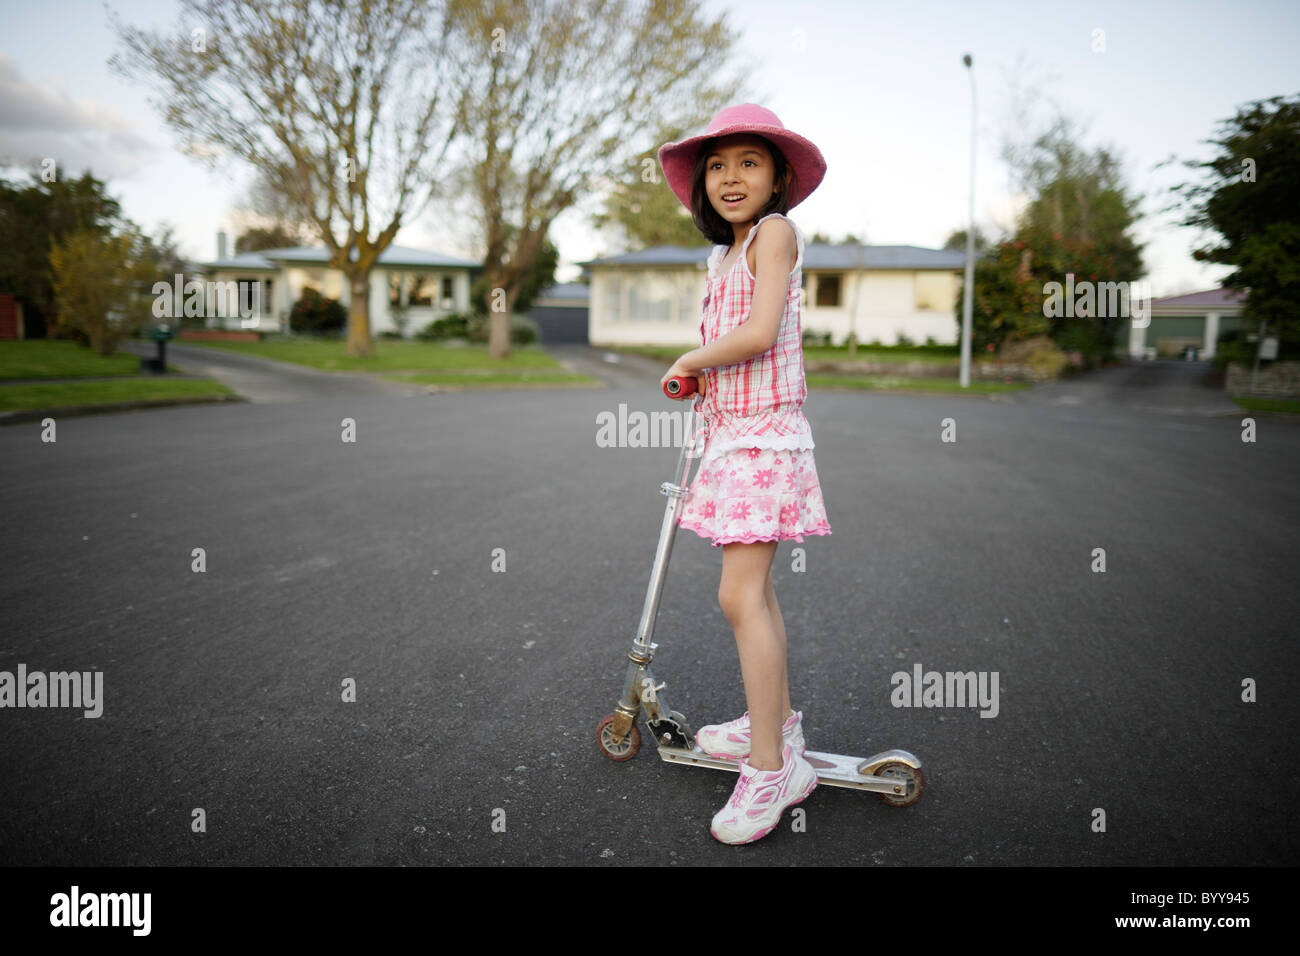 In my street. Girl rides scooter at end of culdesac, New Zealand. Stock Photo